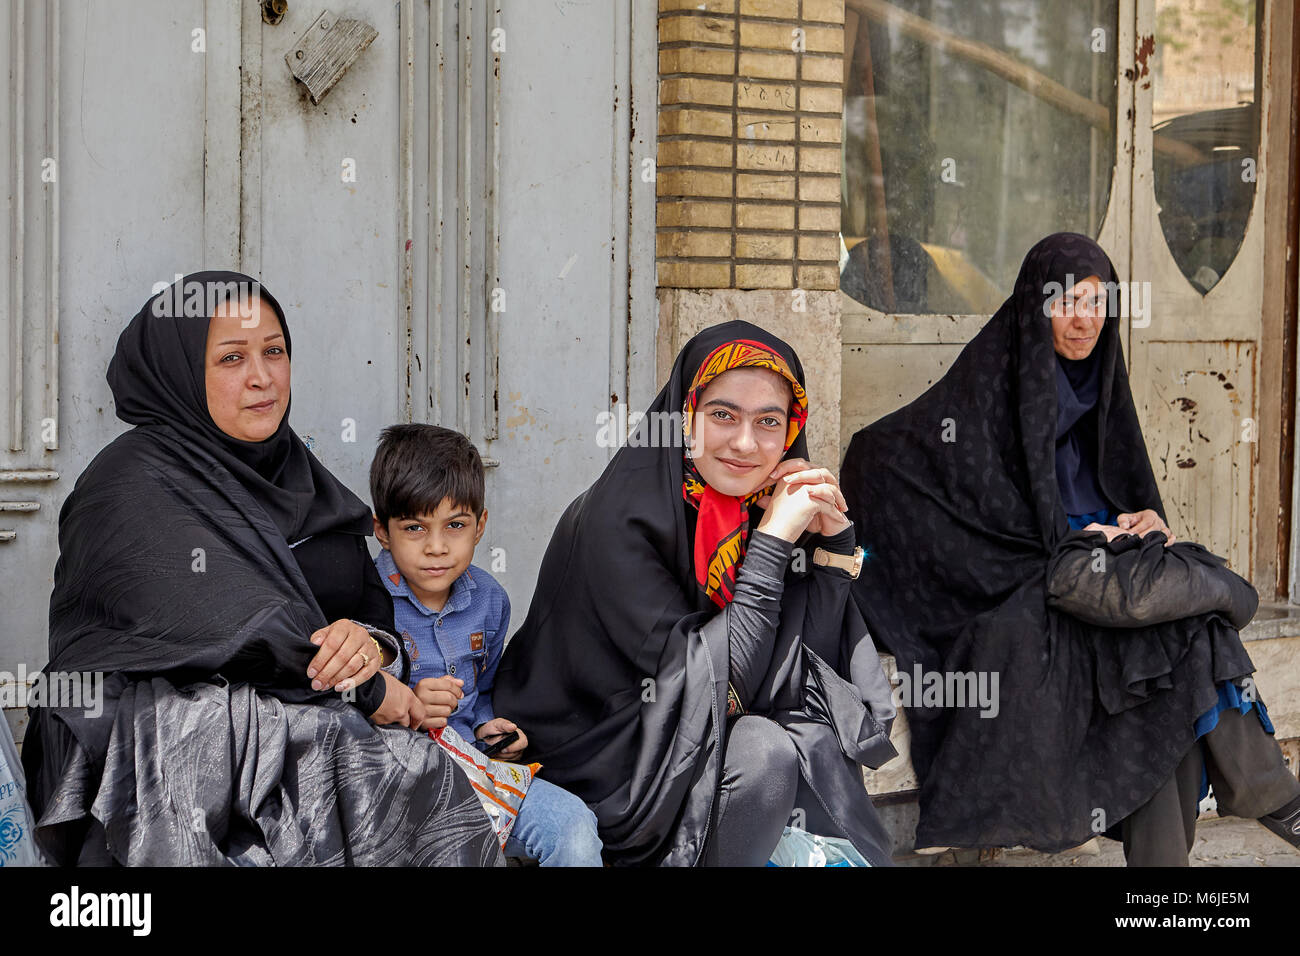 Kashan, Iran - April 27, 2017: Three women dressed in black Islamic clothes, and one little boy waiting for the municipal bus at a public transport st Stock Photo